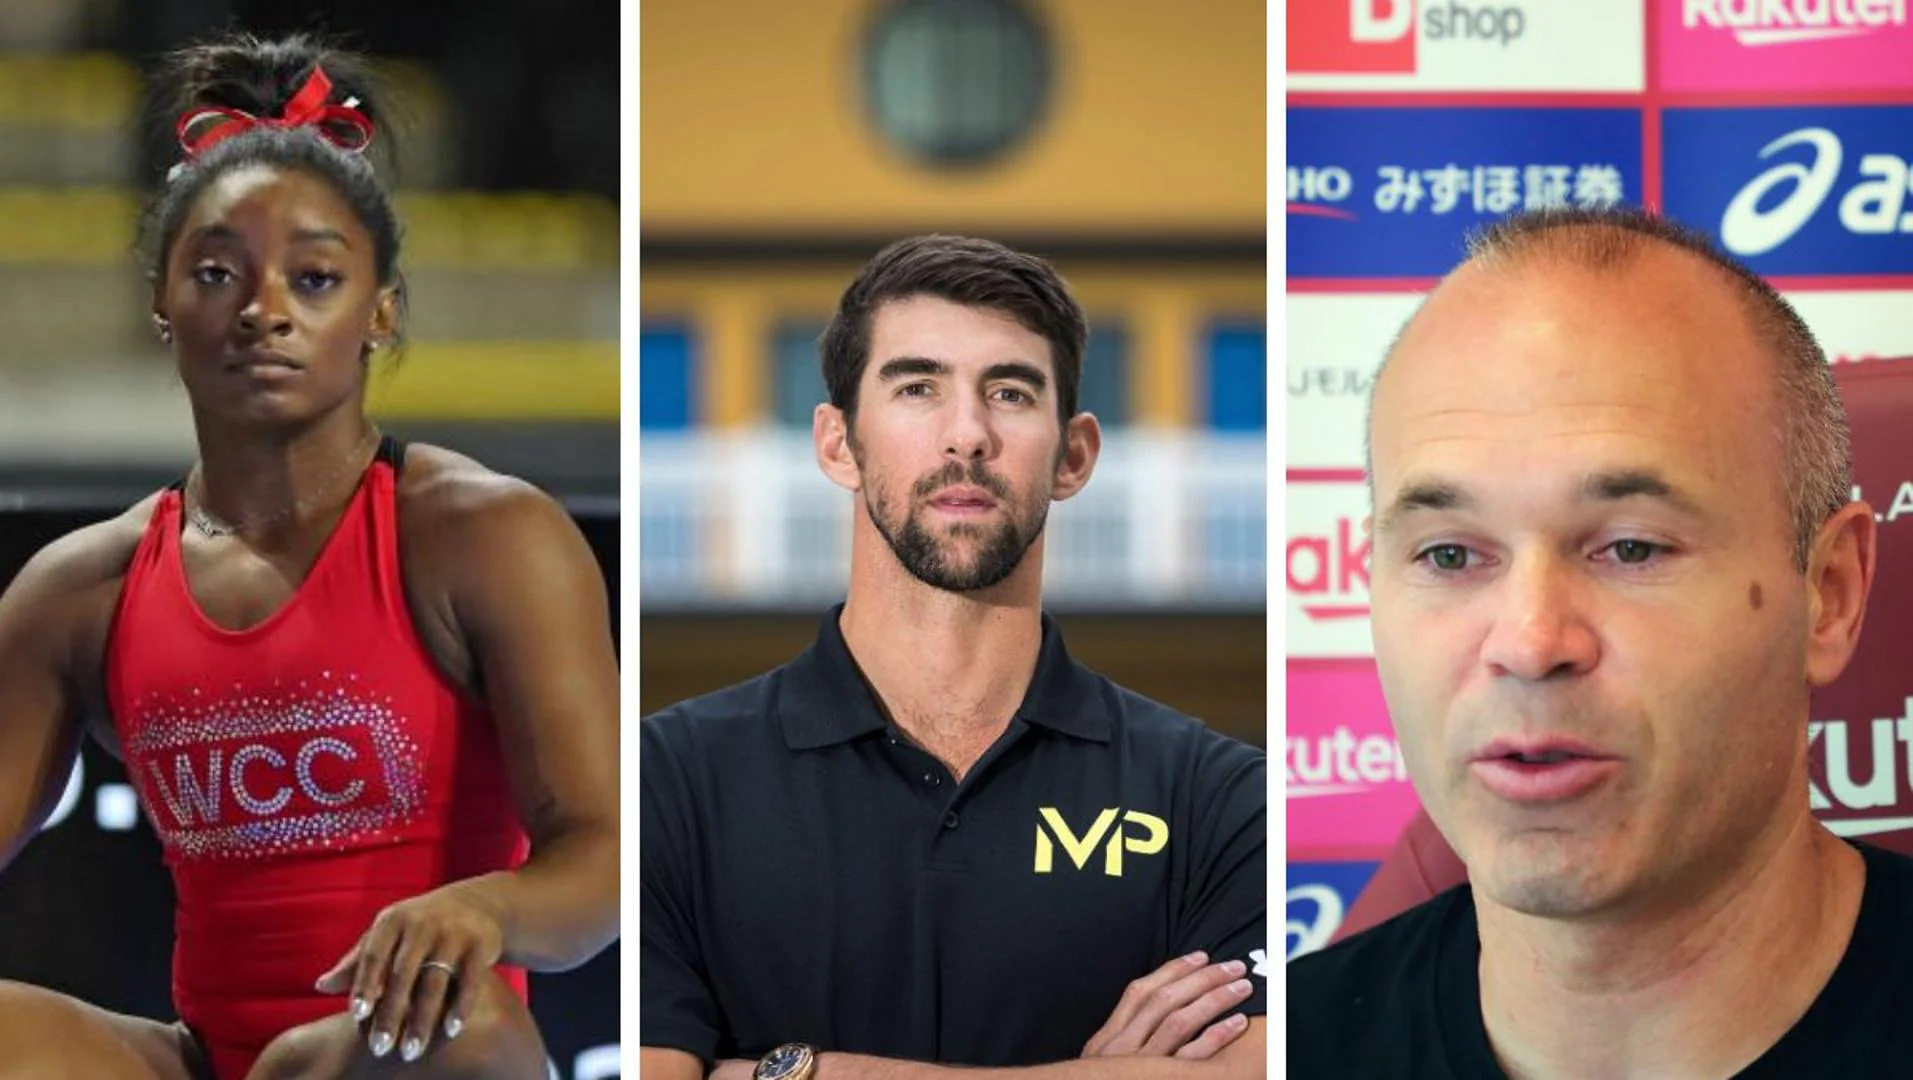 Simone Biles, Michael Phelps and Iniesta also suffered from anxiety or depression